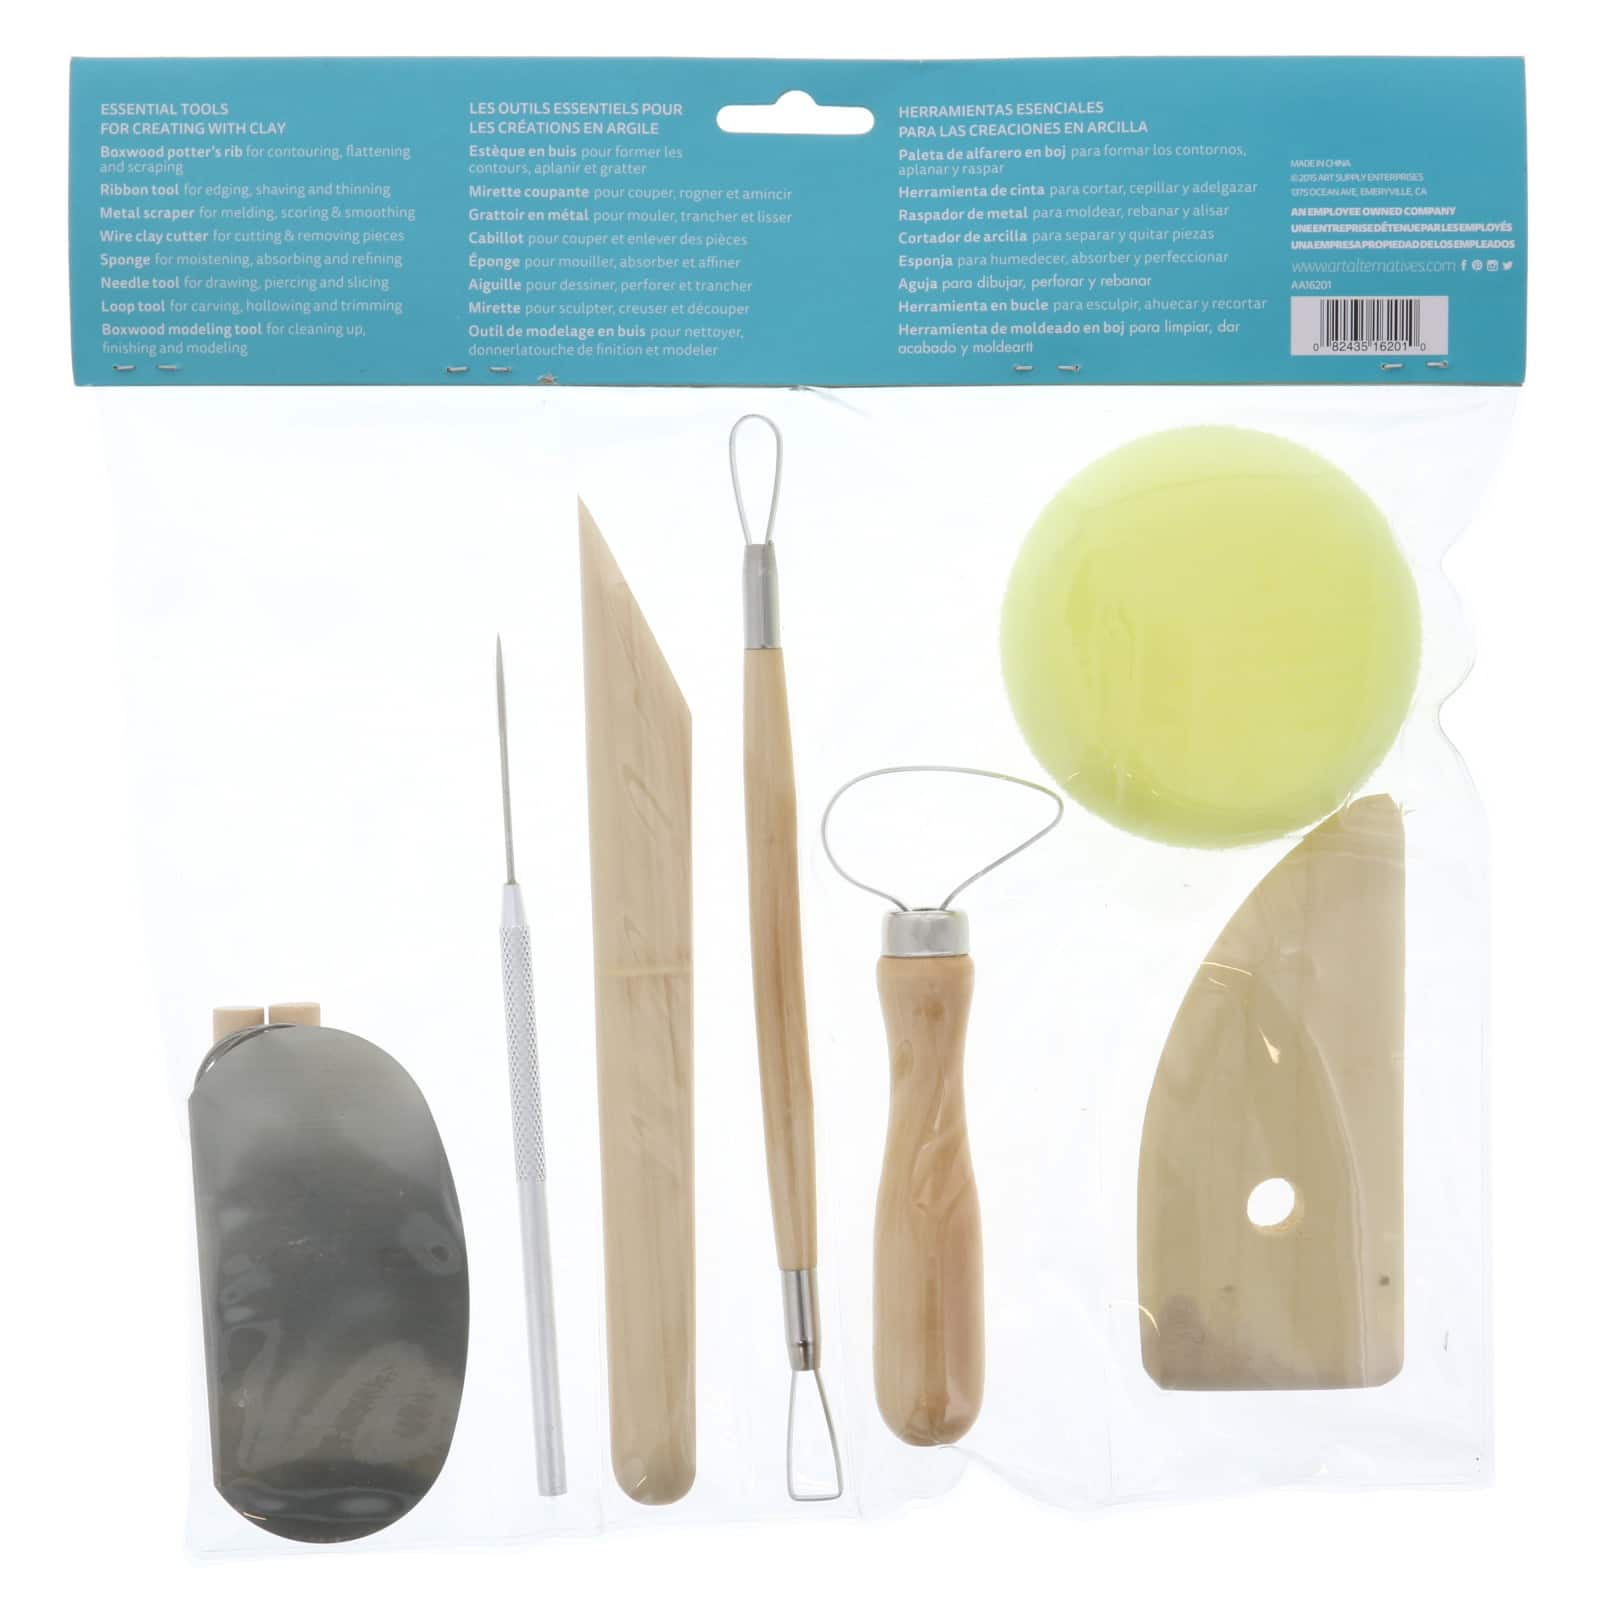 43 Piece Clay Tool Set by Craft Smart®, Michaels